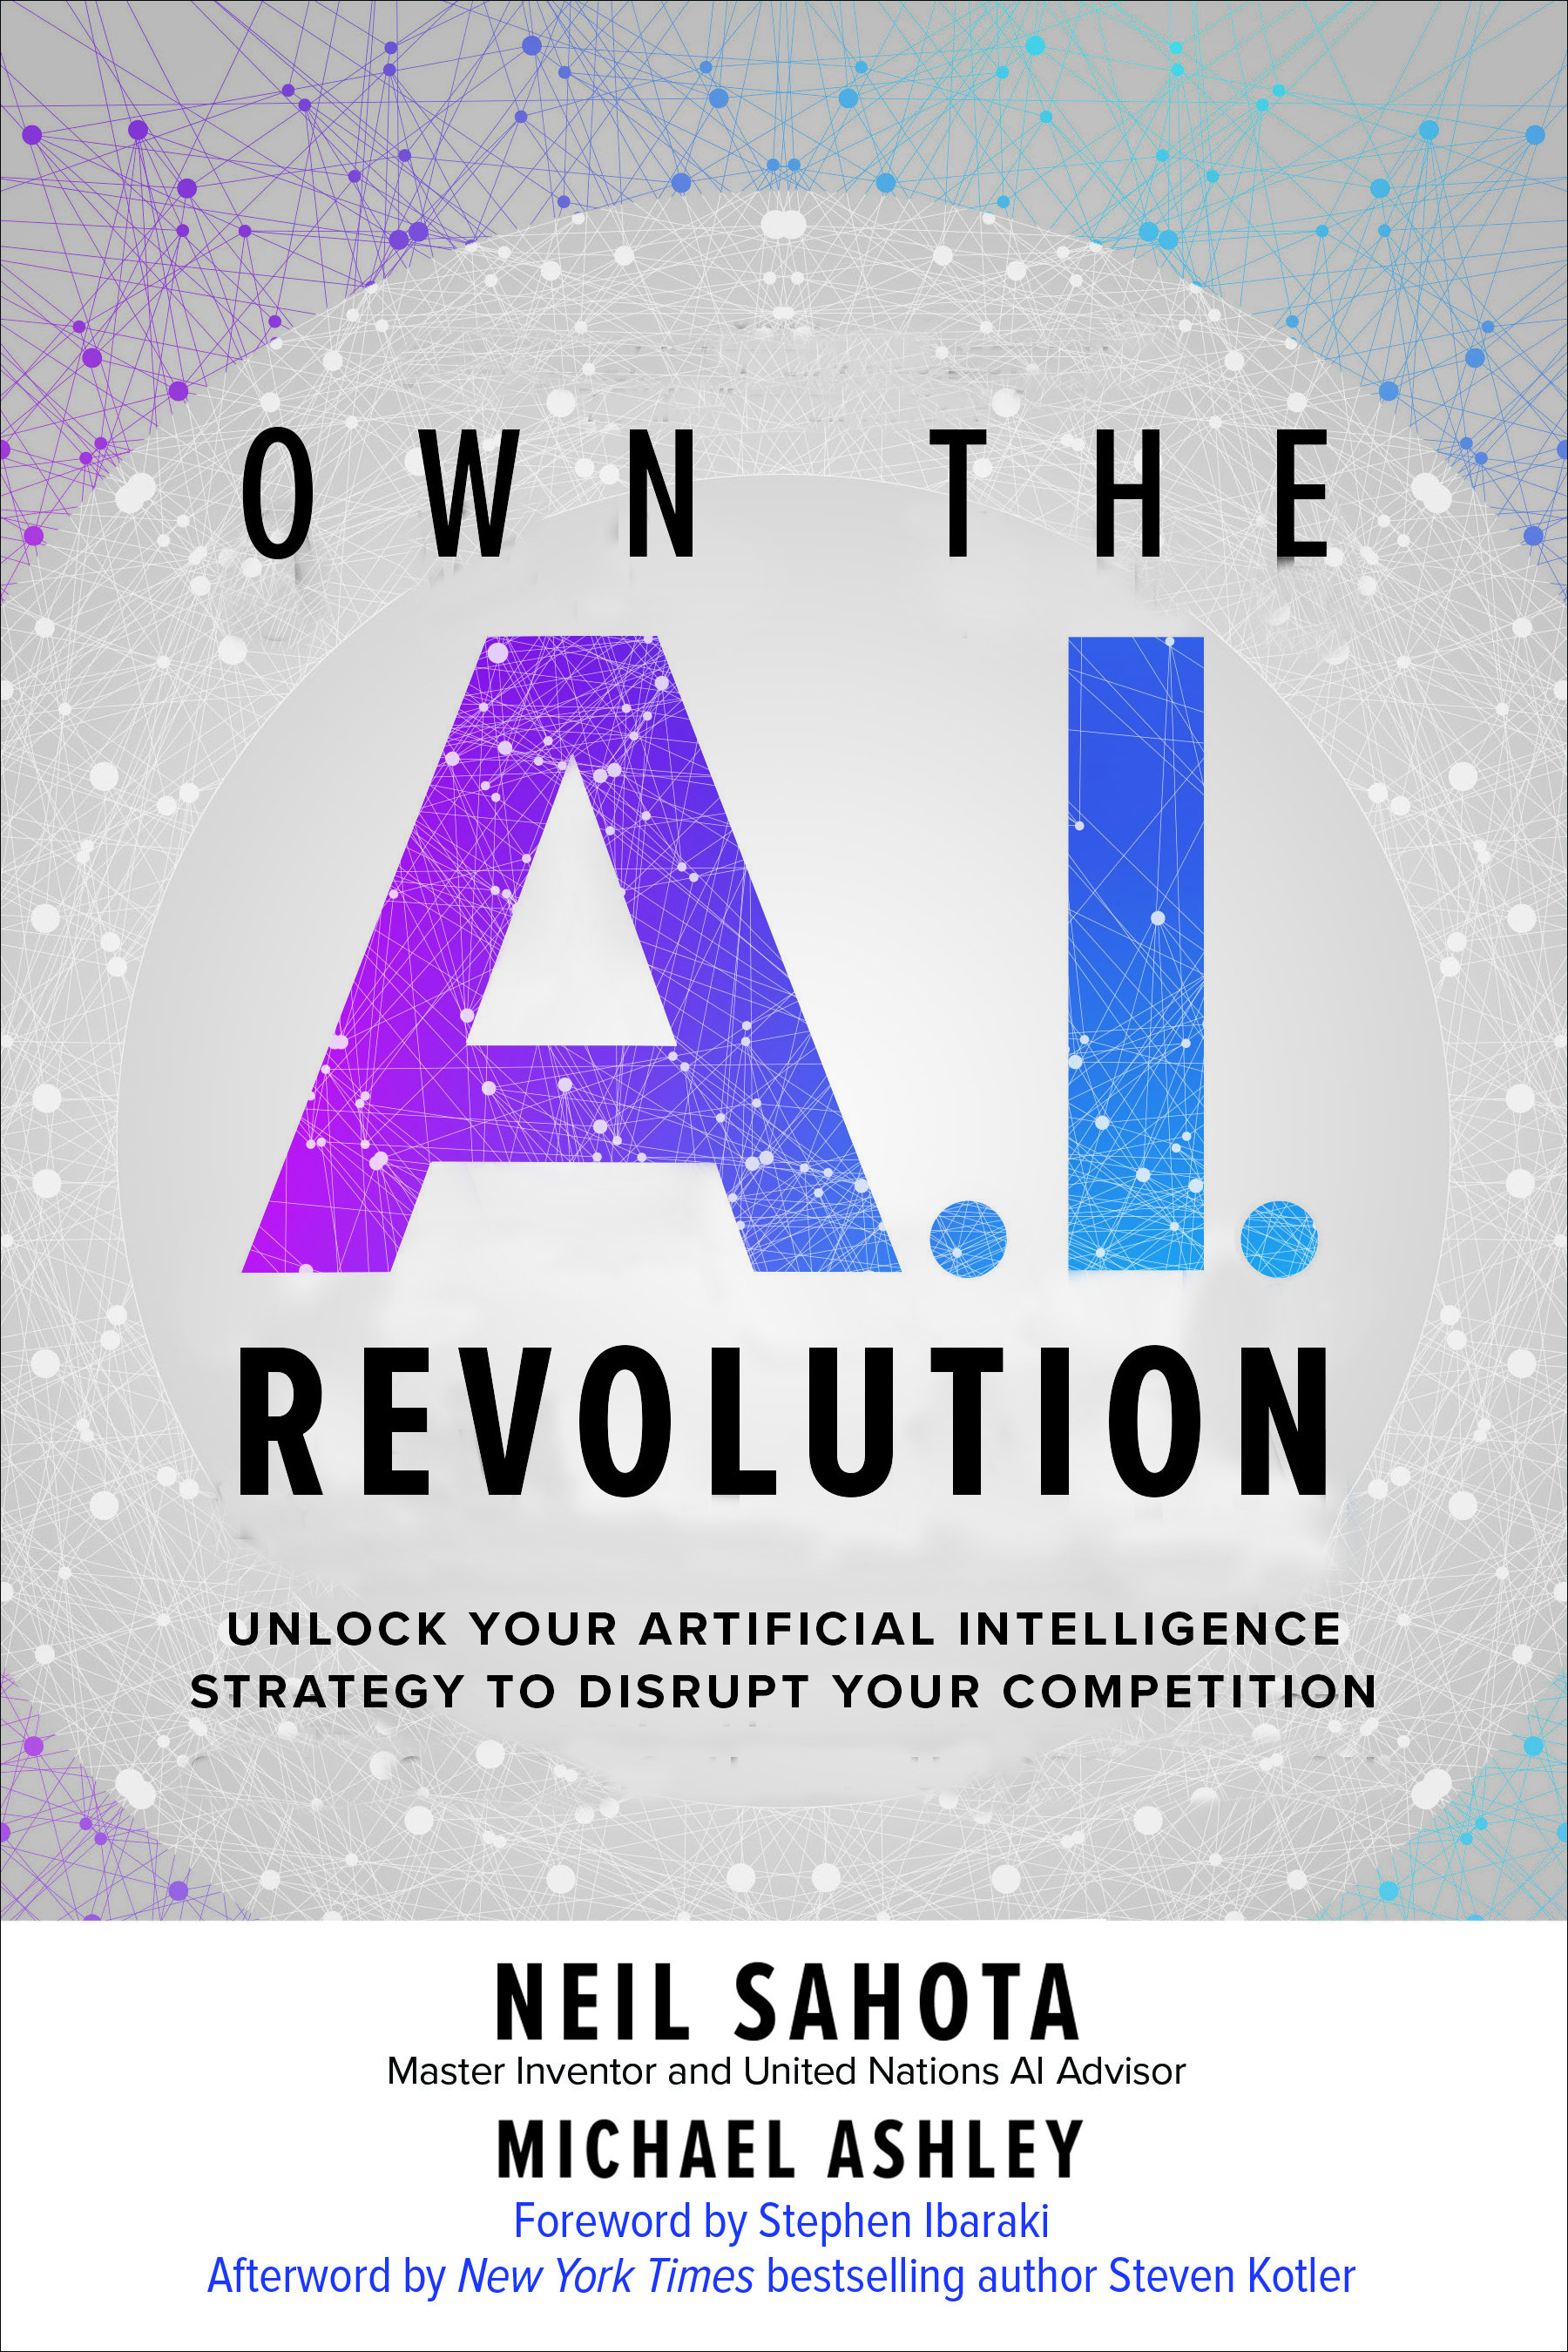 Own the A.I. Revolution: Unlock Your Artificial Intelligence Strategy to Disrupt Your Competition By Neil Sahota and Michael Ashley